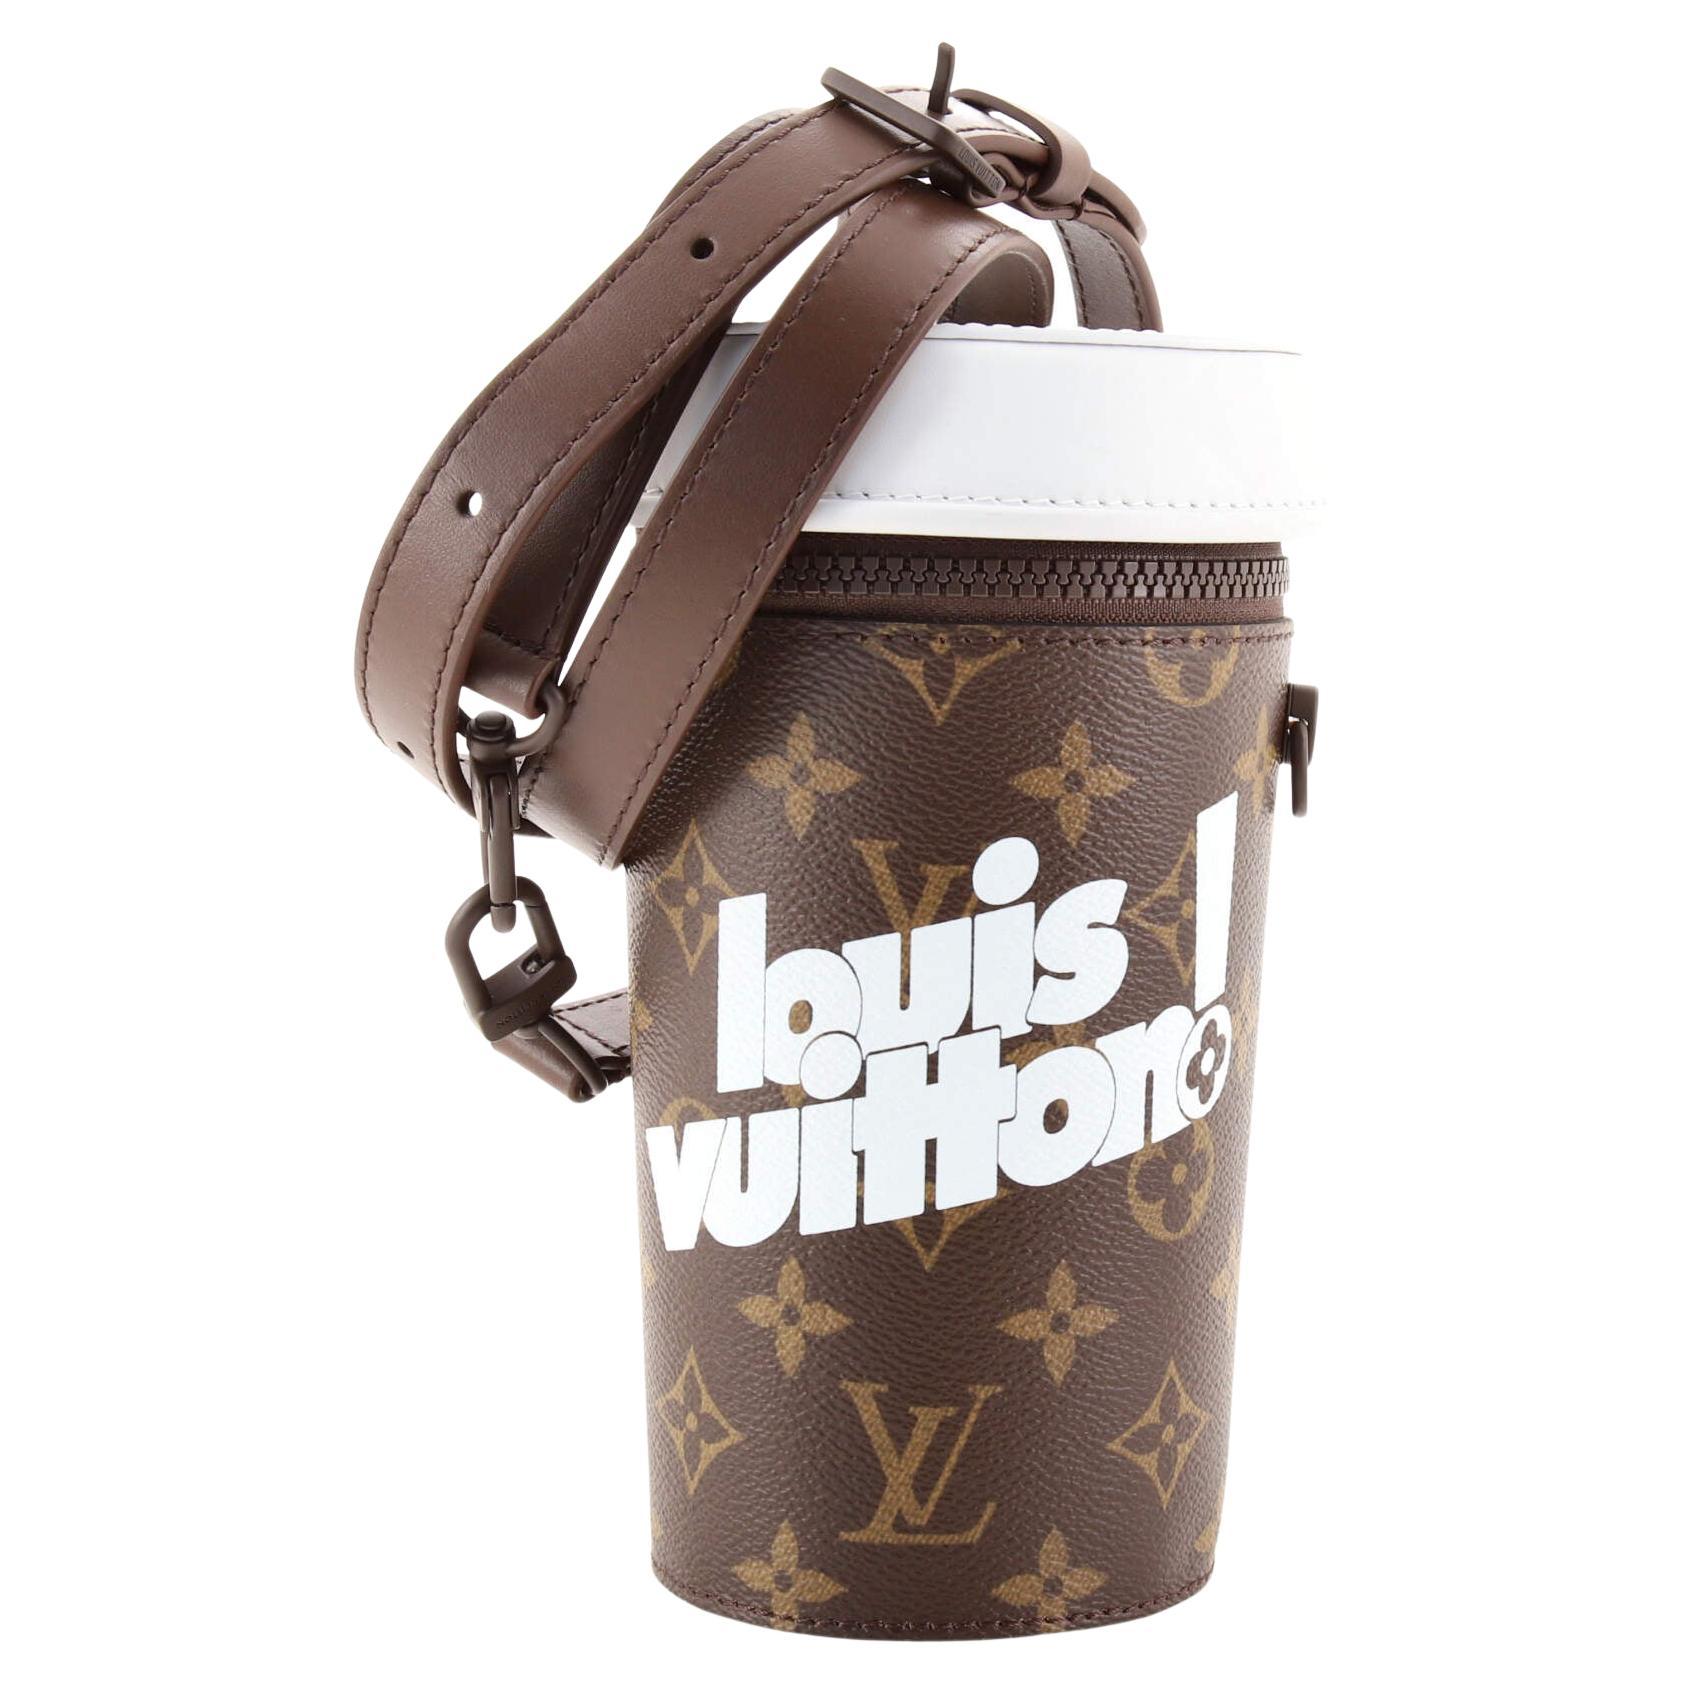 Louis Vuitton The Coffee Cup pouch was unveiled at